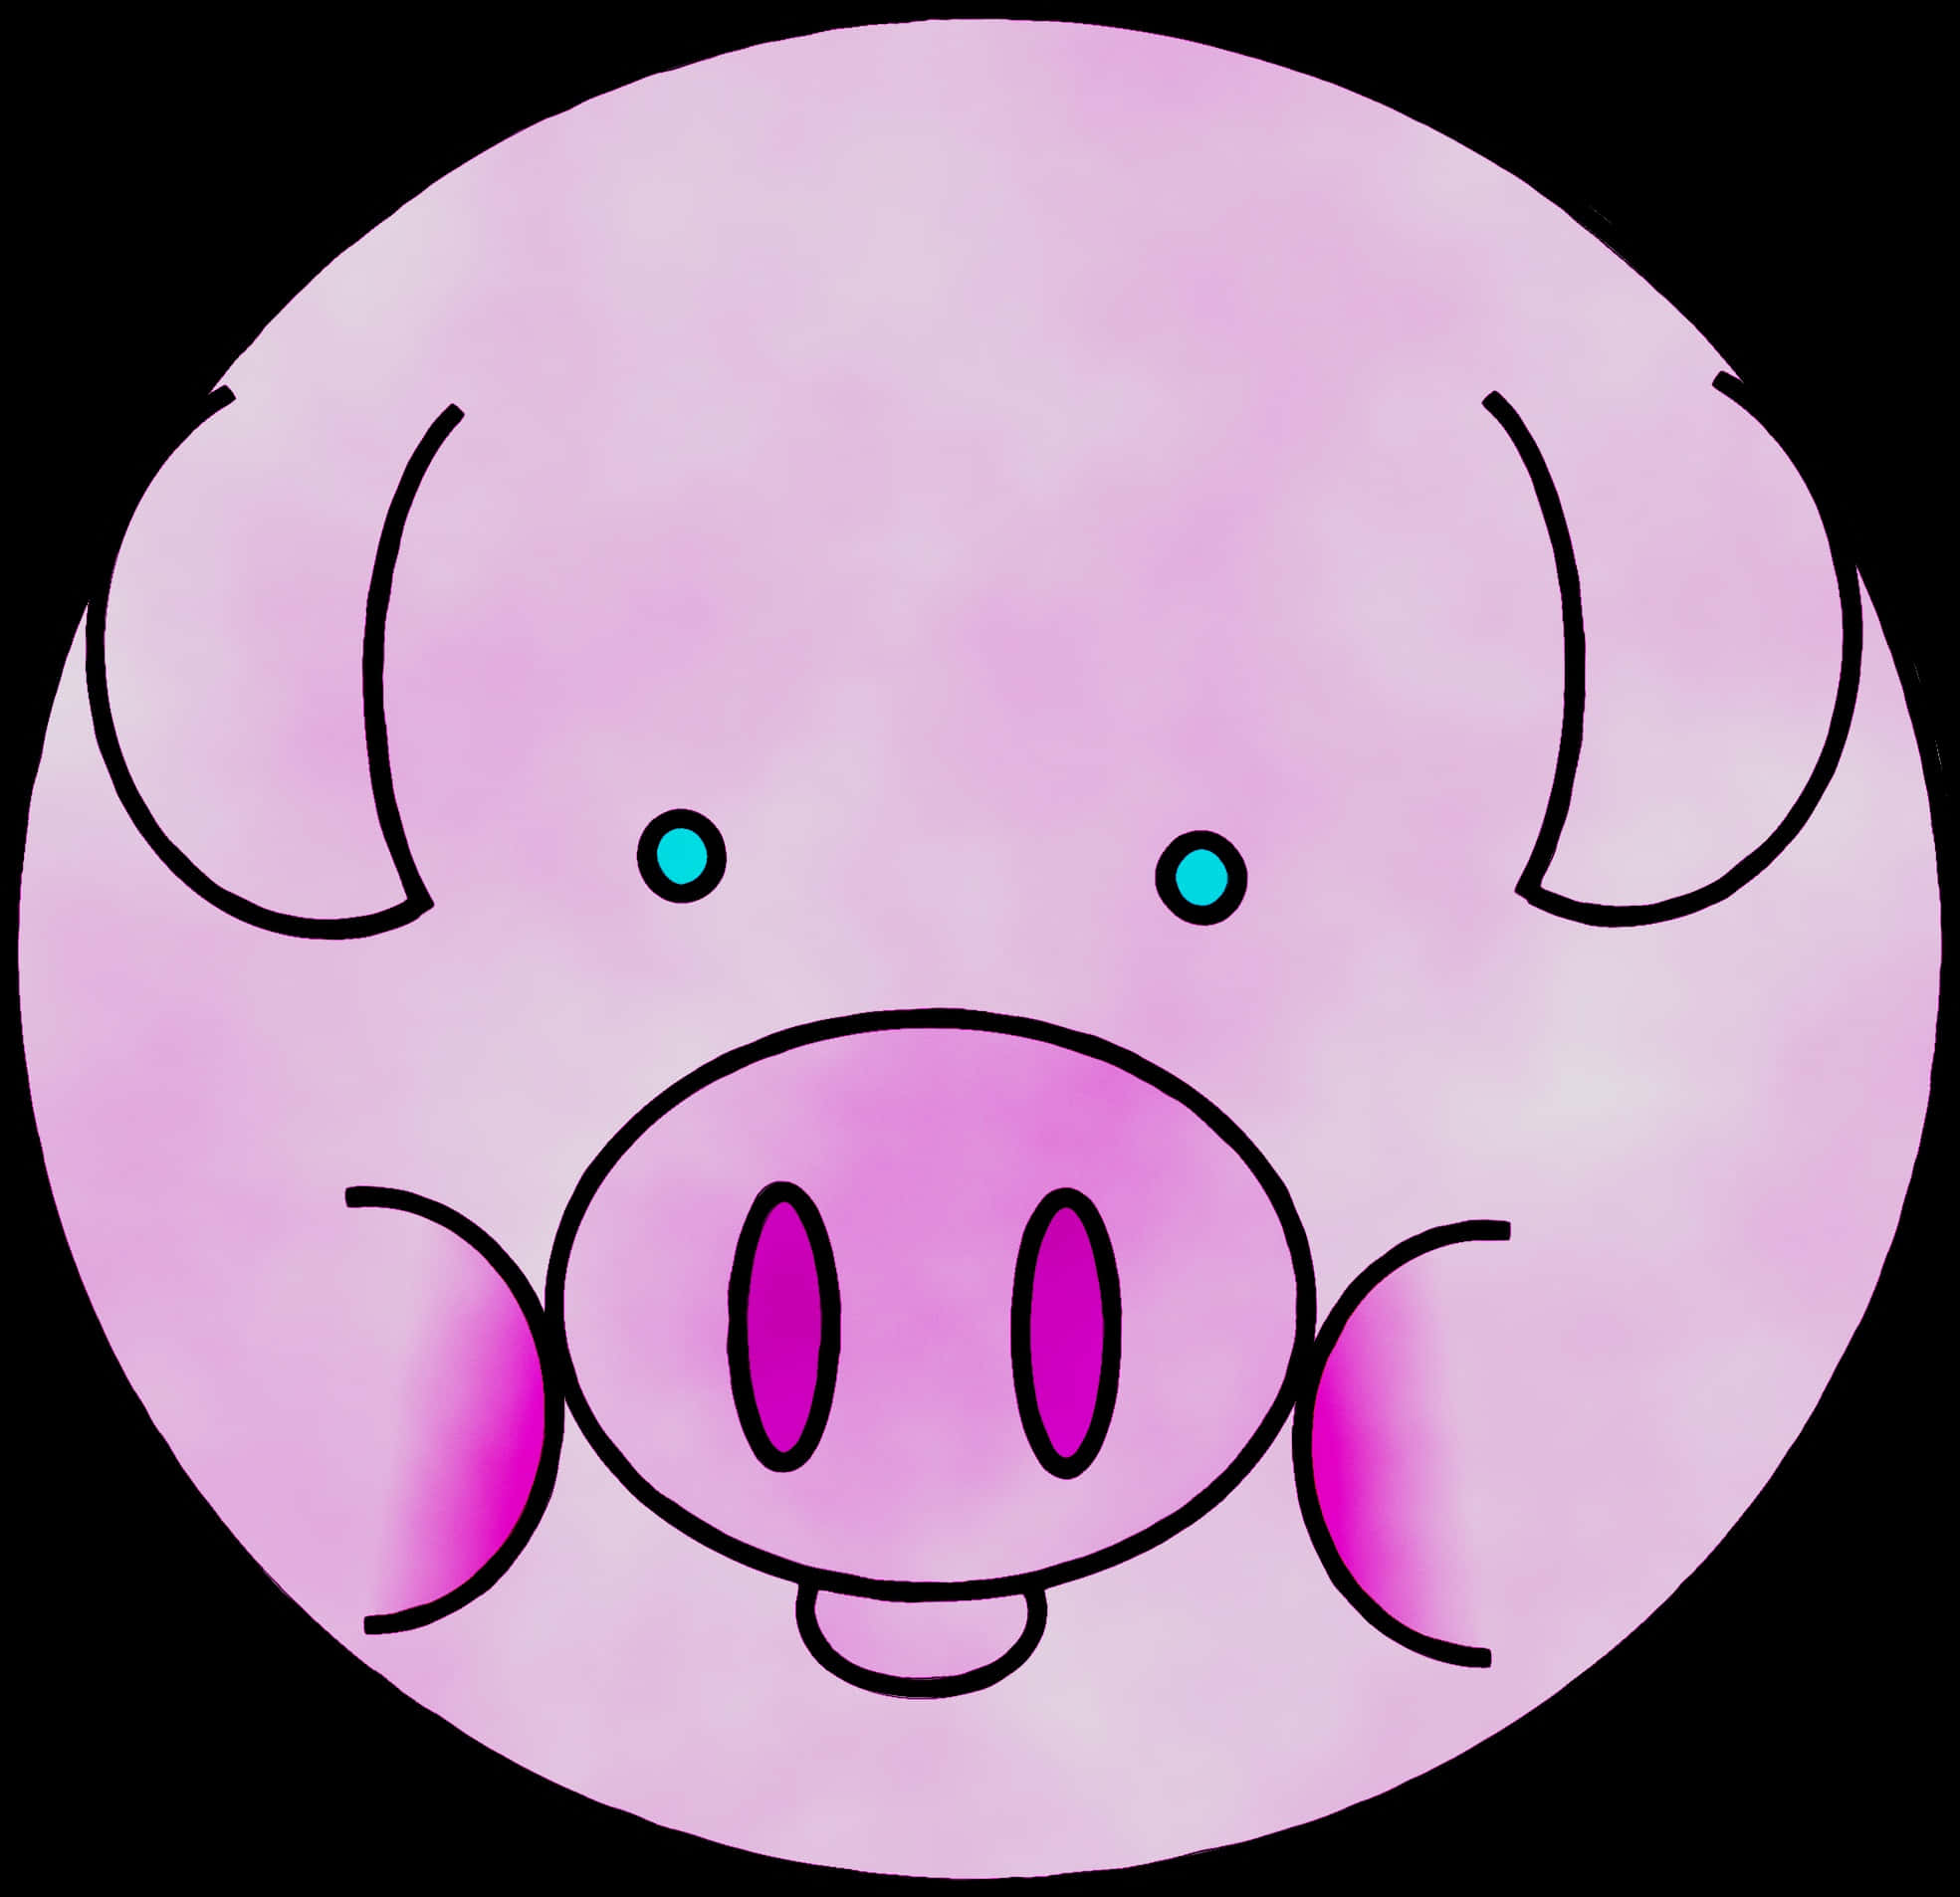 A Pink Pig Face With Blue Eyes And Nose